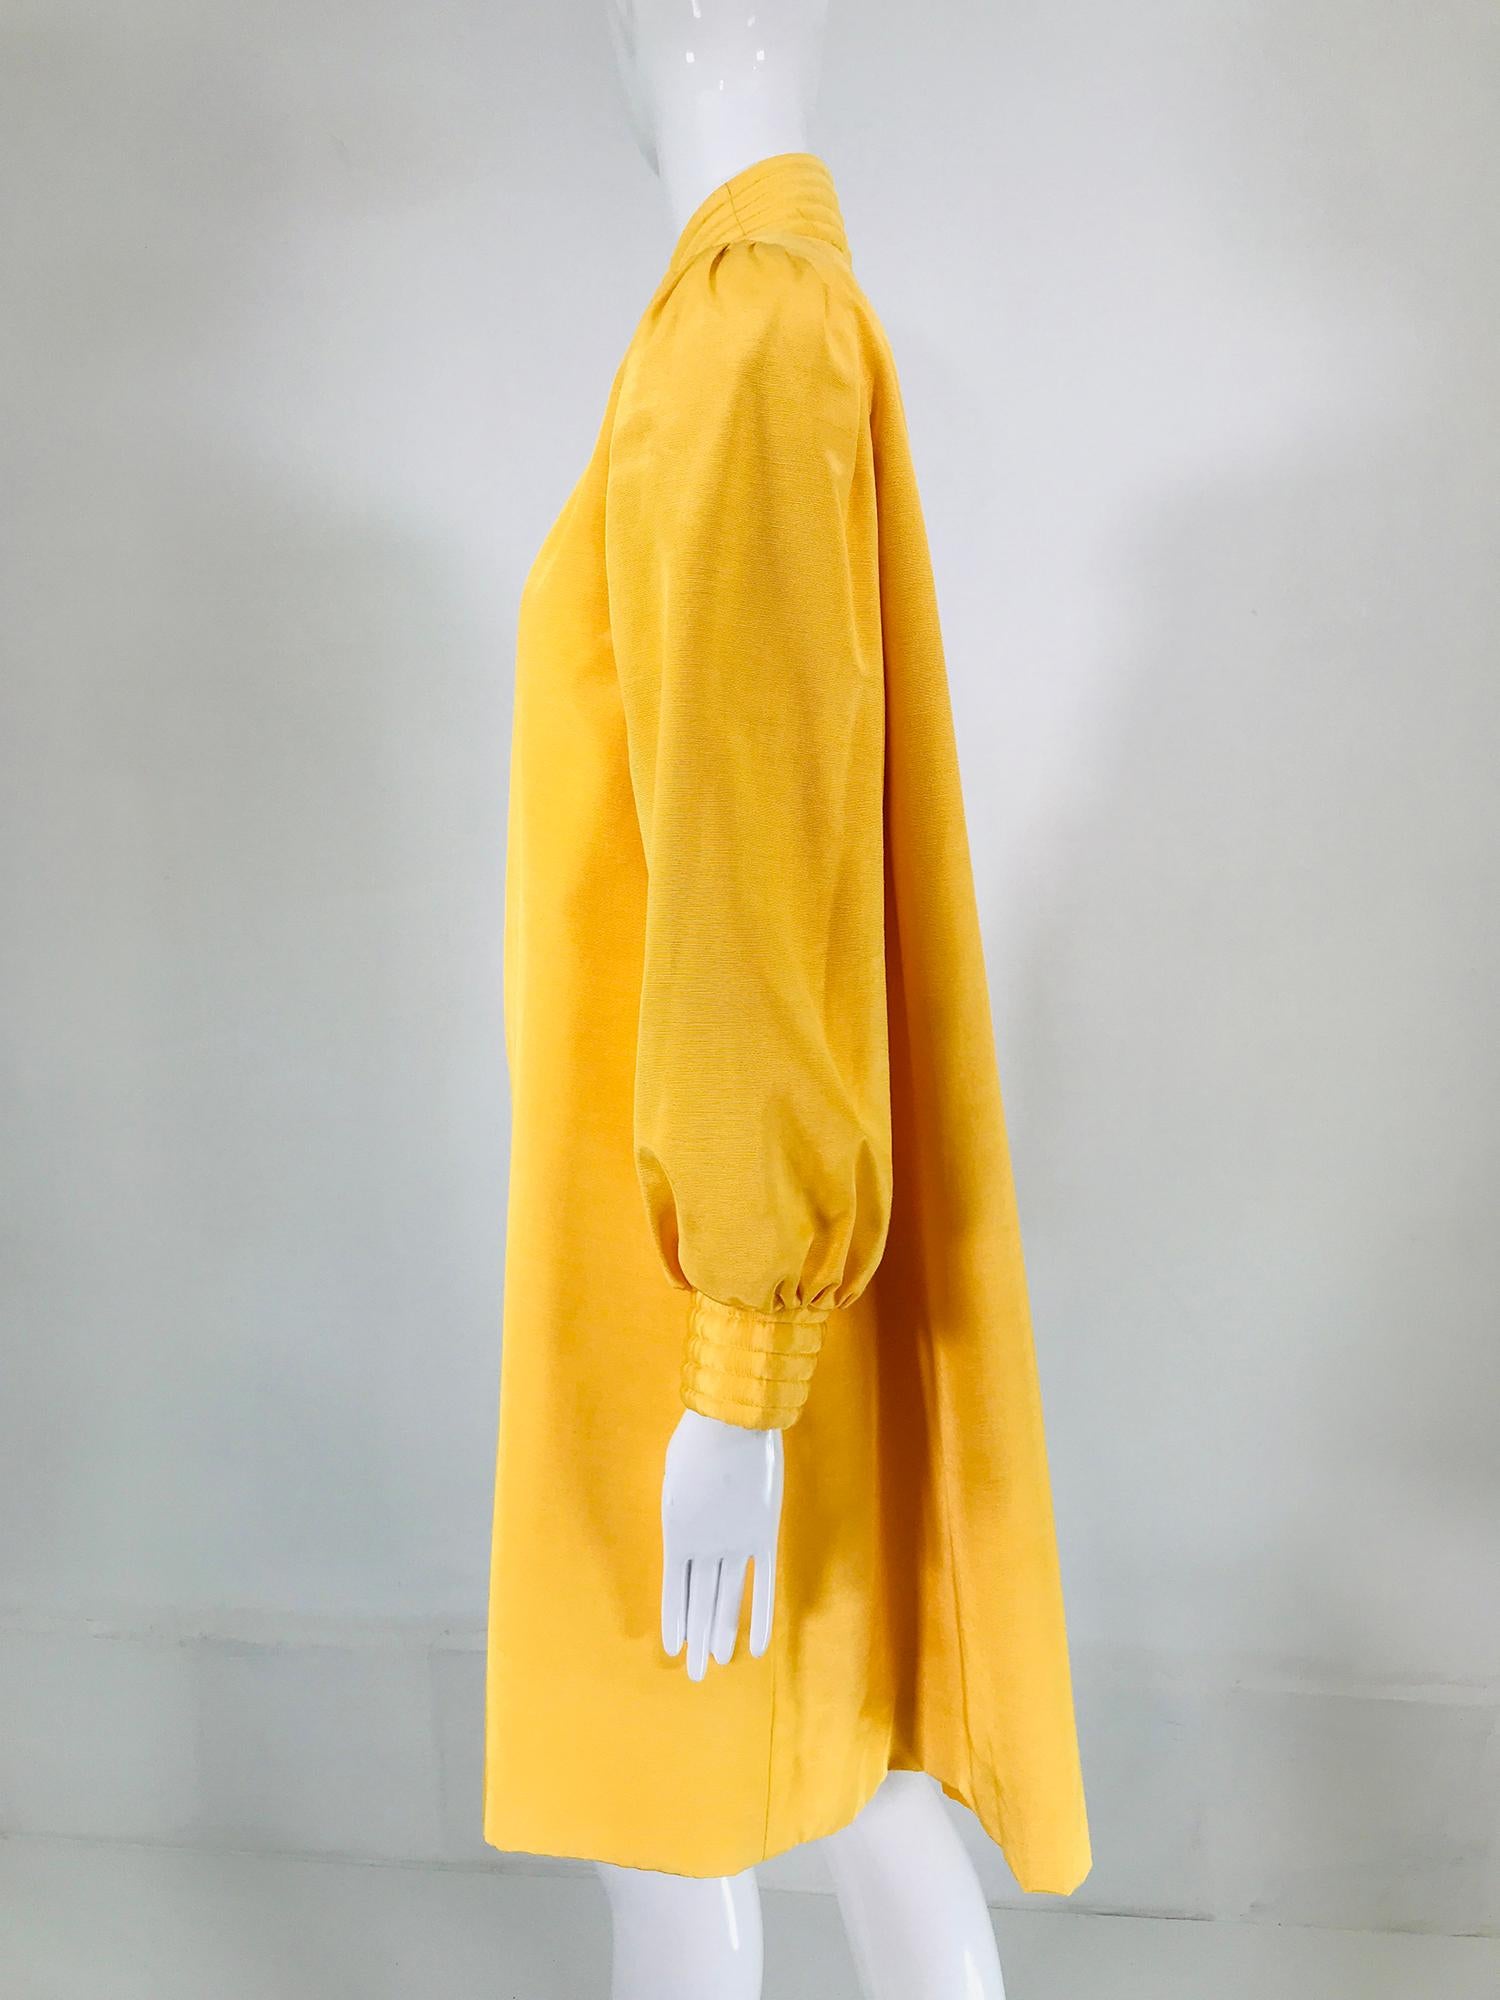 Women's Victor Costa Mustard Yellow Faille Coat Quilted Facings & Cuffs 1980s For Sale